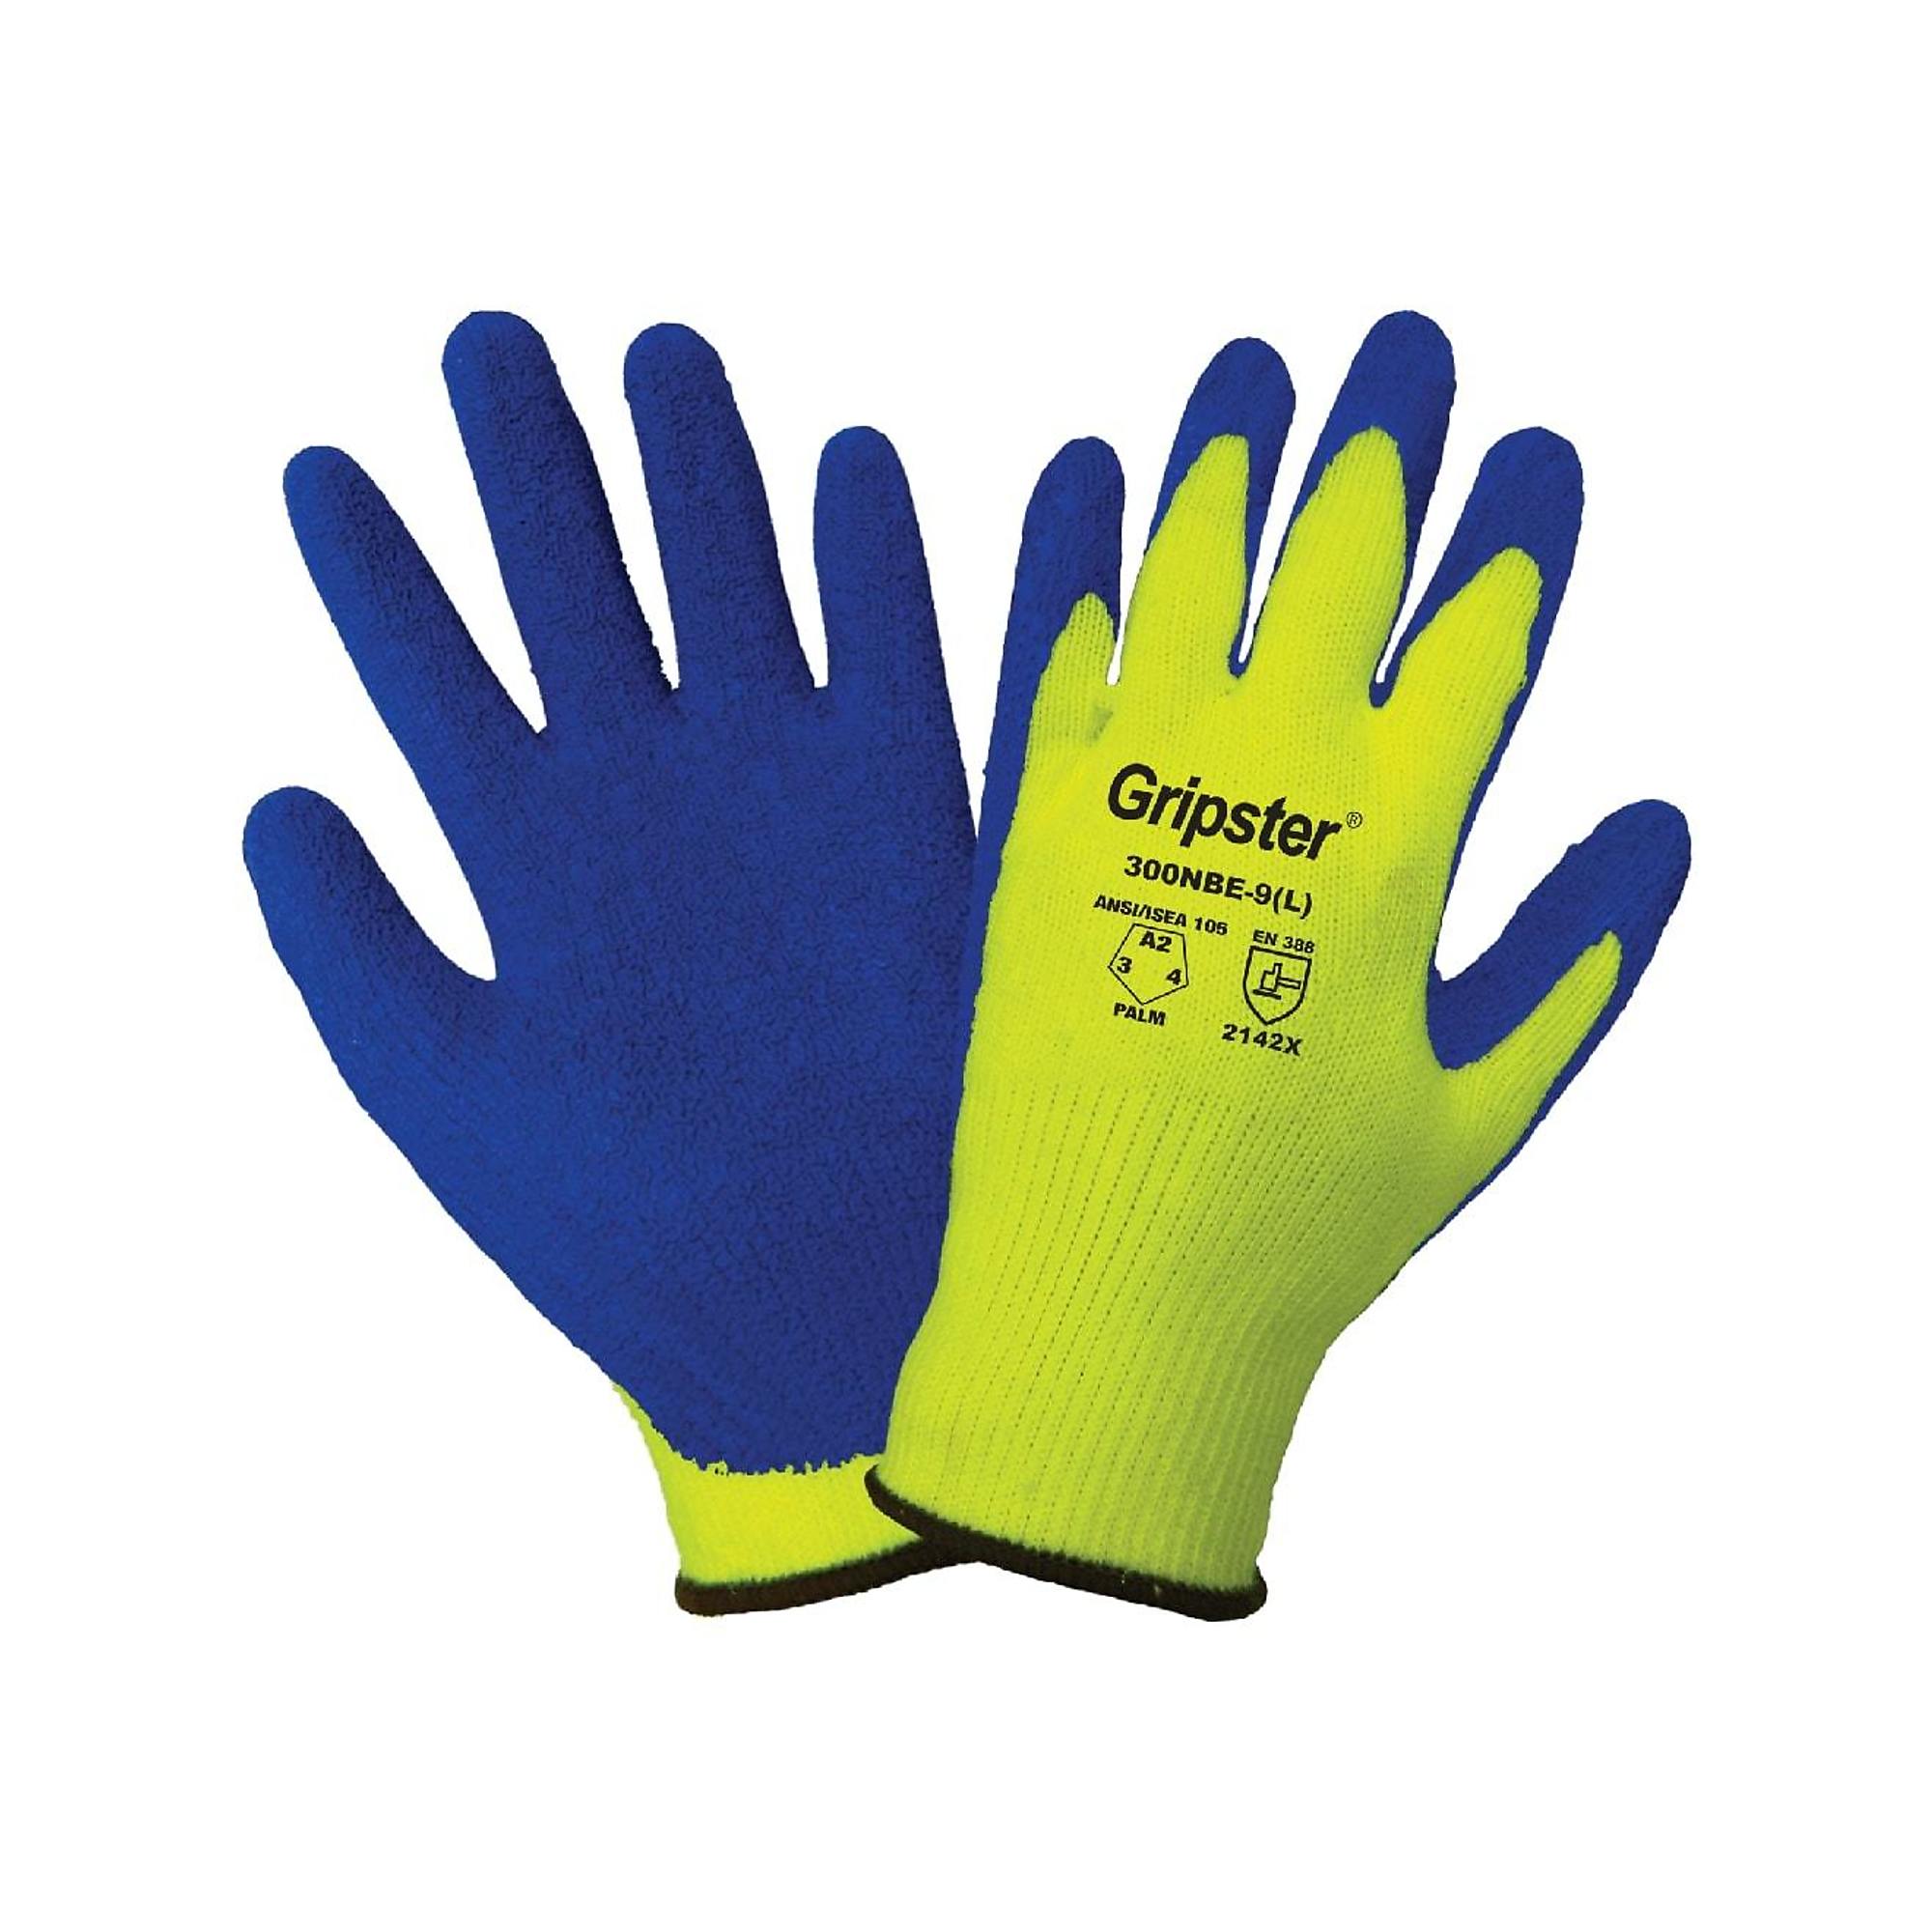 Global Glove Gripster , HV Yel, Blue Rubber Dip, Cut Resistant A2 Gloves - 12 Pairs, Size XL, Color High-Visibility Yellow/Blue, Included (qty.) 12